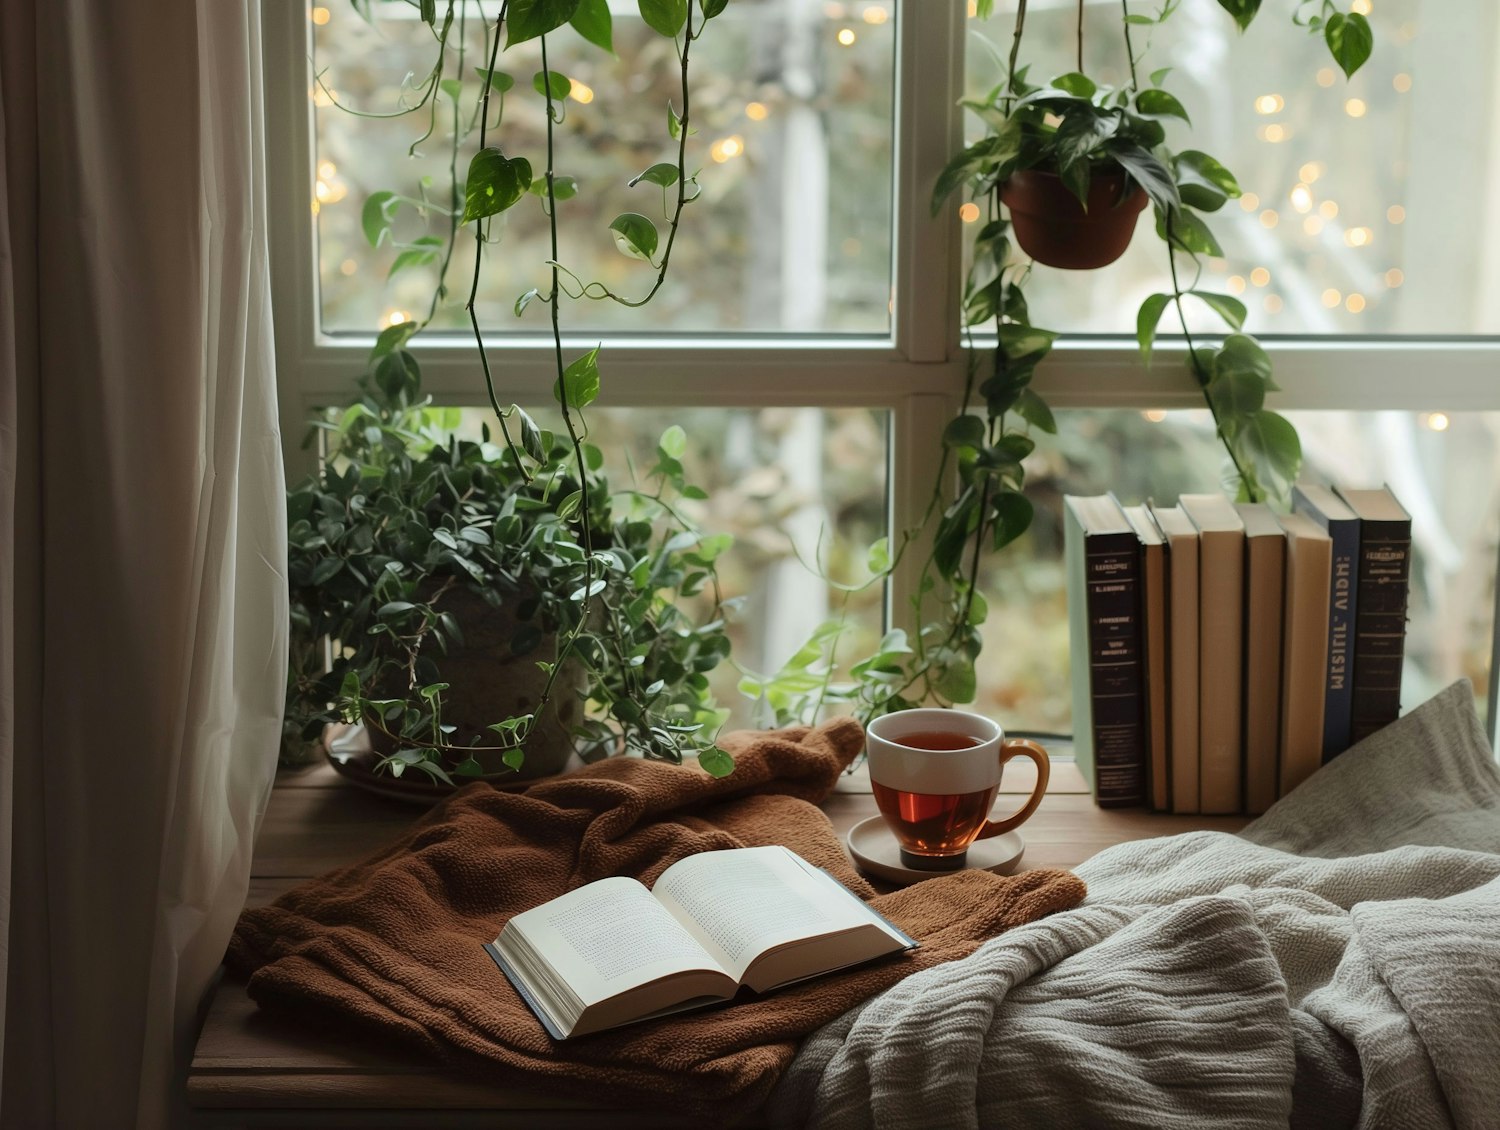 Cozy Reading Nook by the Window